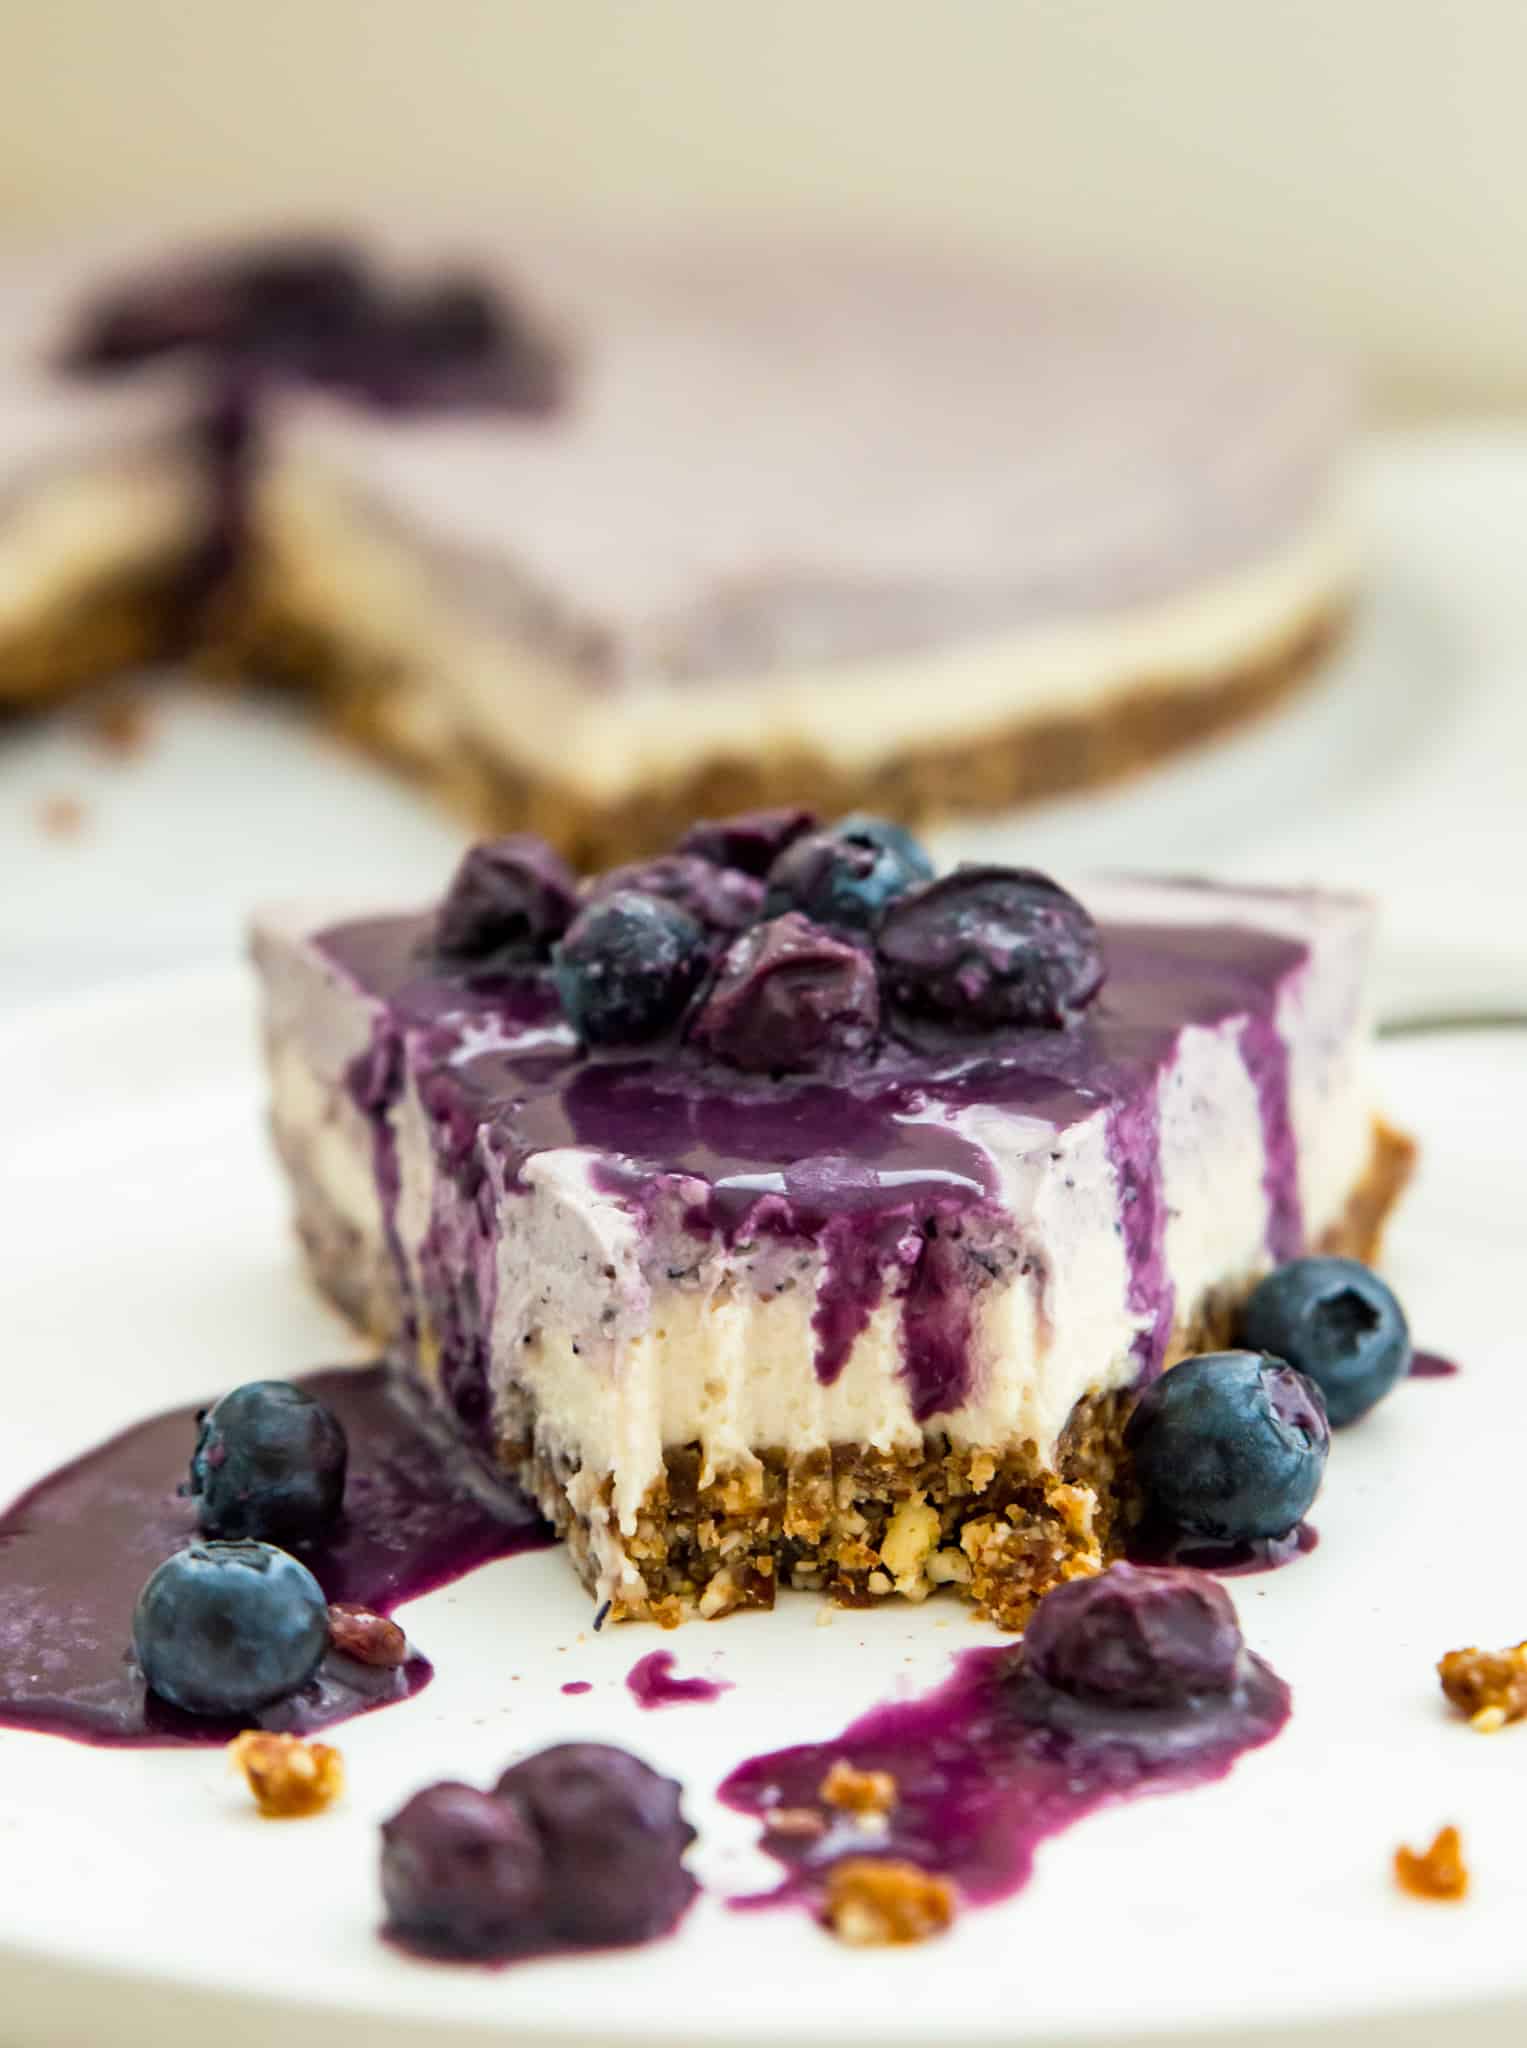 A slice of vegan cheesecake covered in blueberry sauce with a bite taken out.